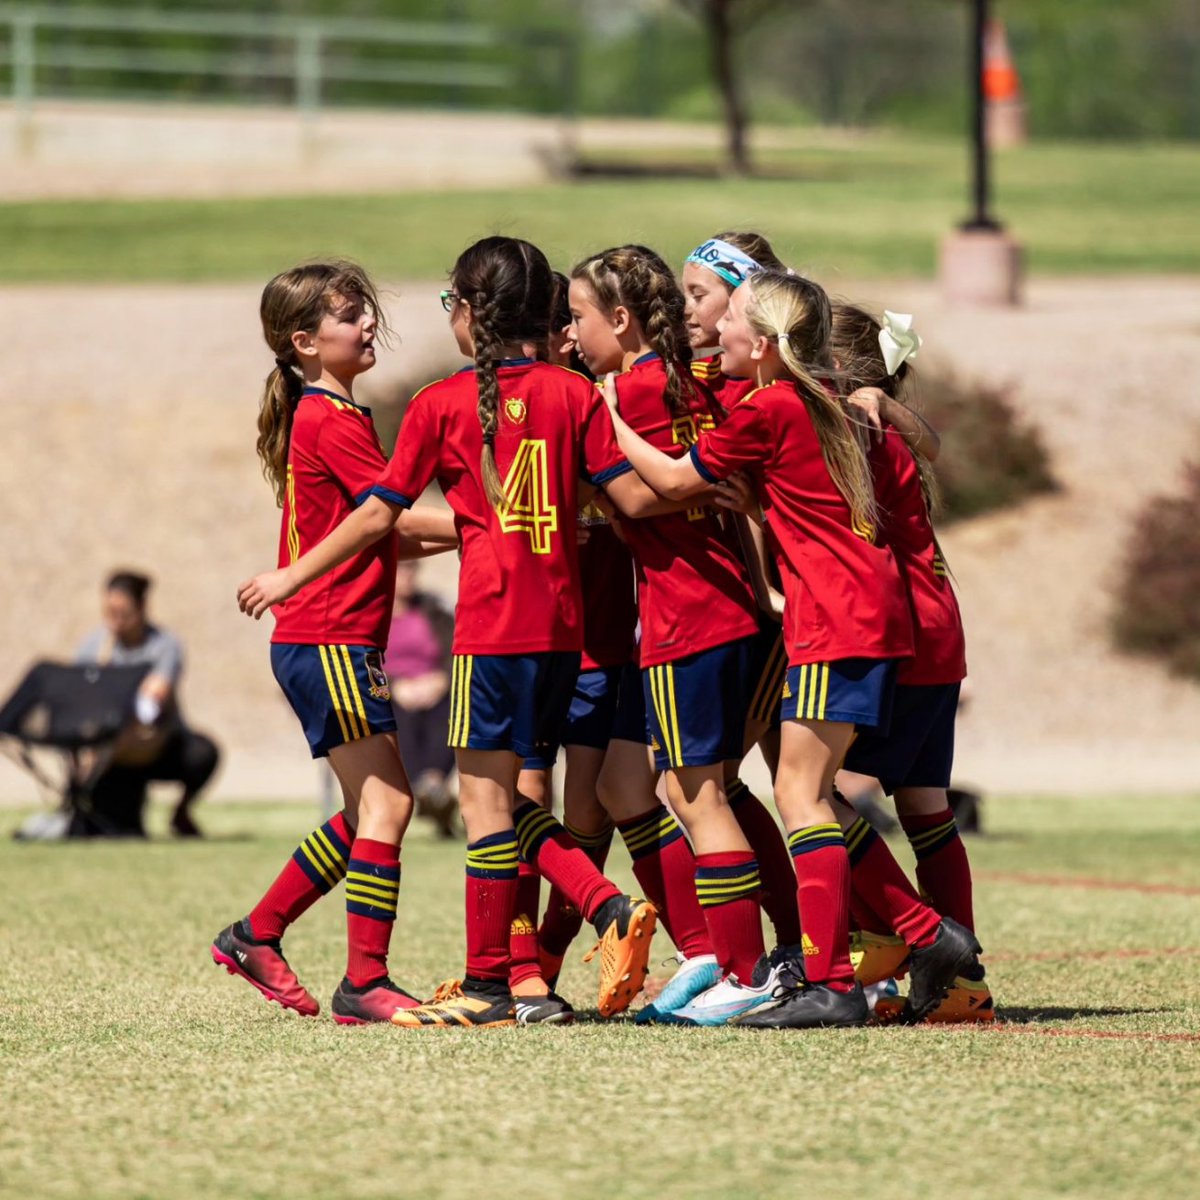 No better feeling than celebrating with your team 🎊

#Celebration #Teamwork #RatedSportsGroup #YouthSoccer #WomensSoccer #SoccerTeam